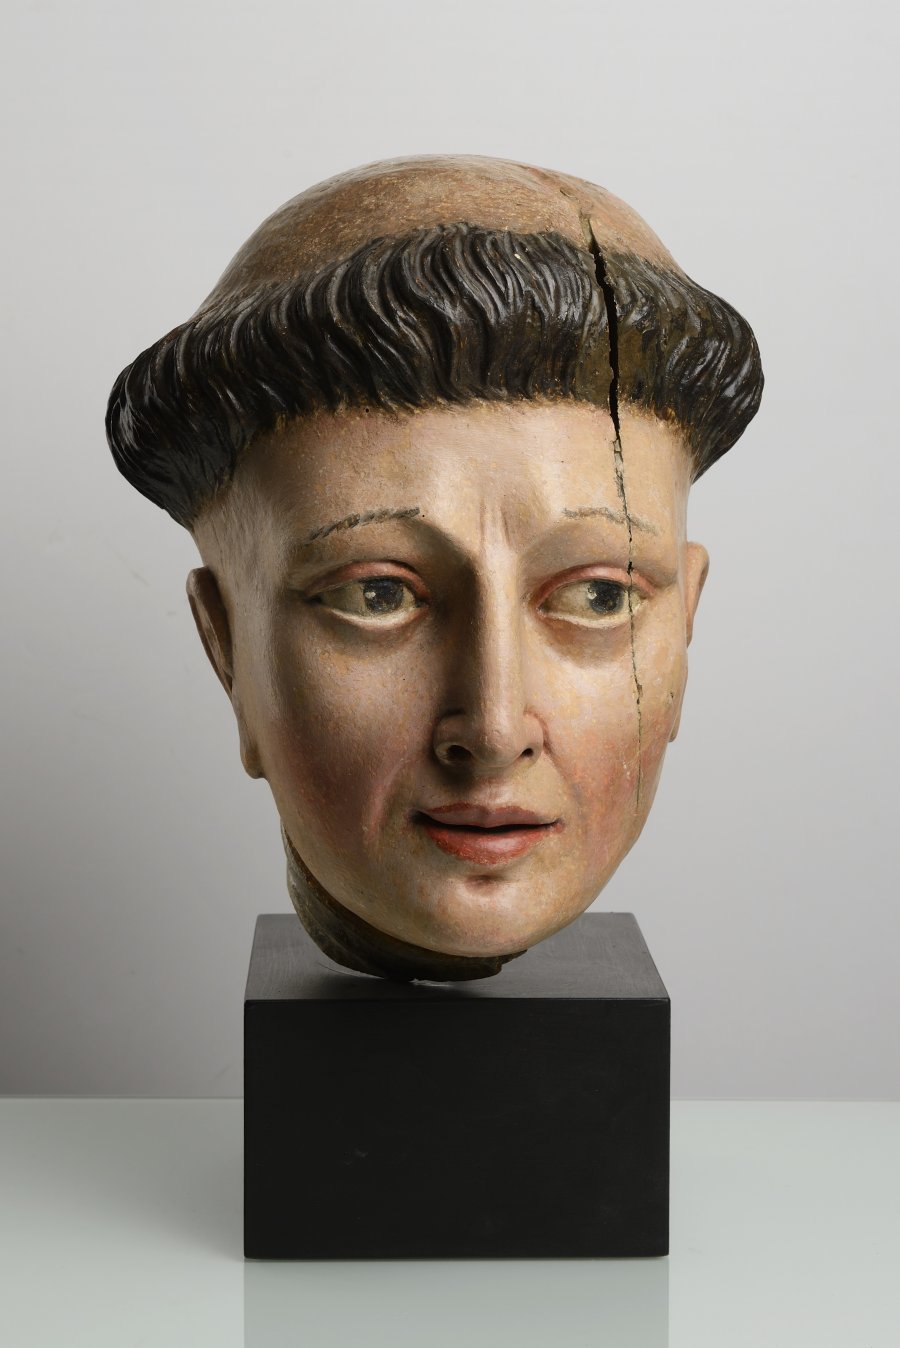 The Head of a Monk